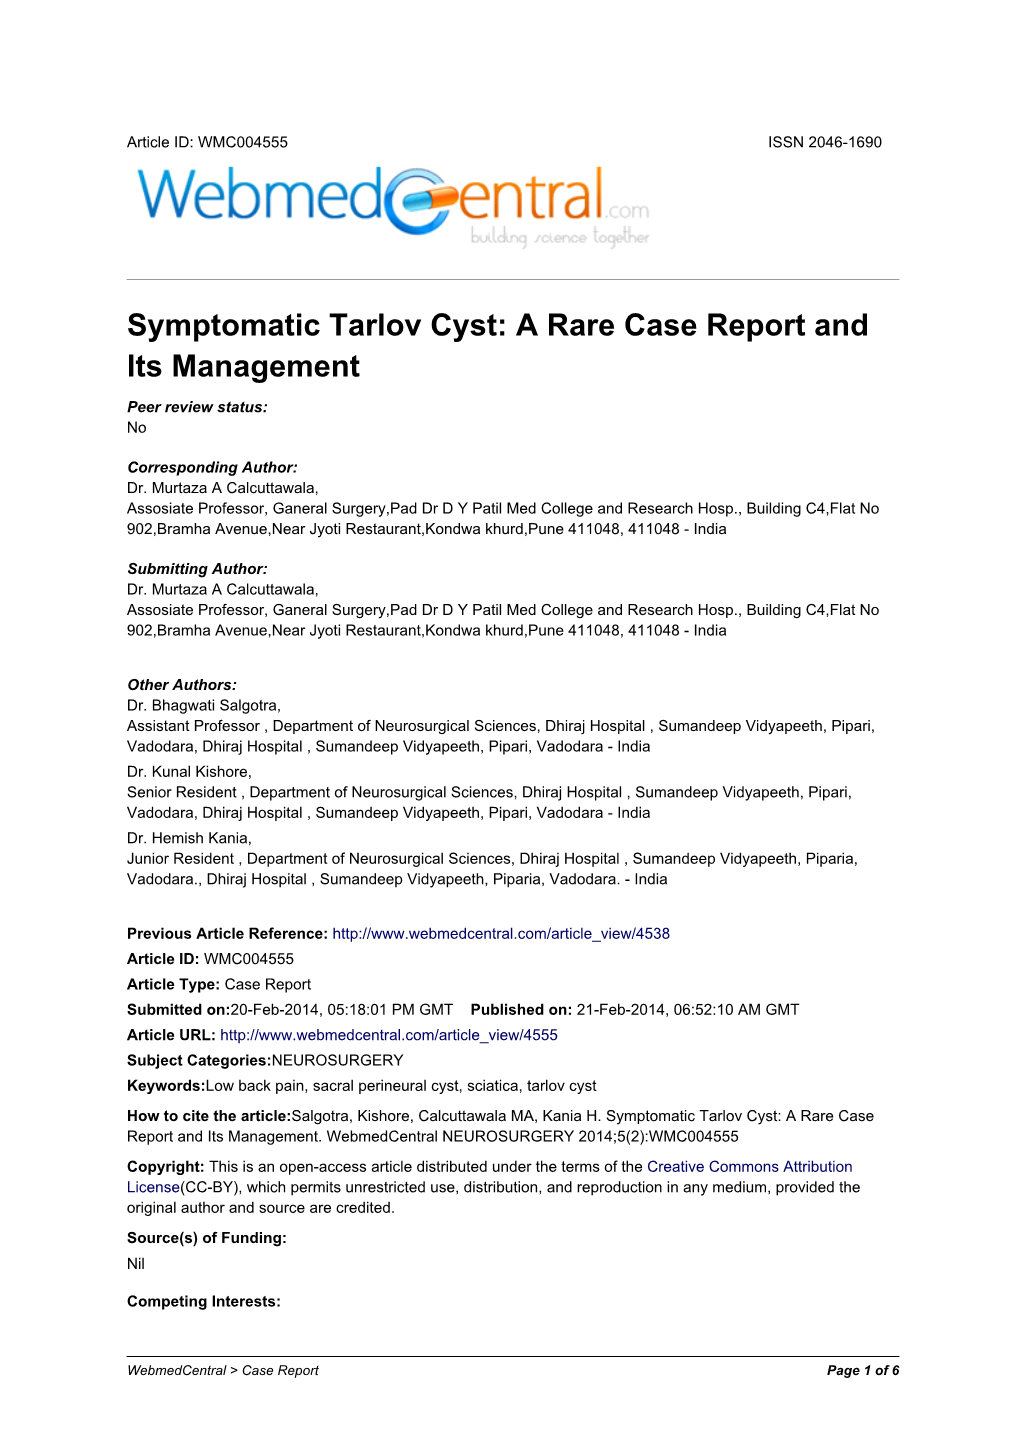 Symptomatic Tarlov Cyst: a Rare Case Report and Its Management